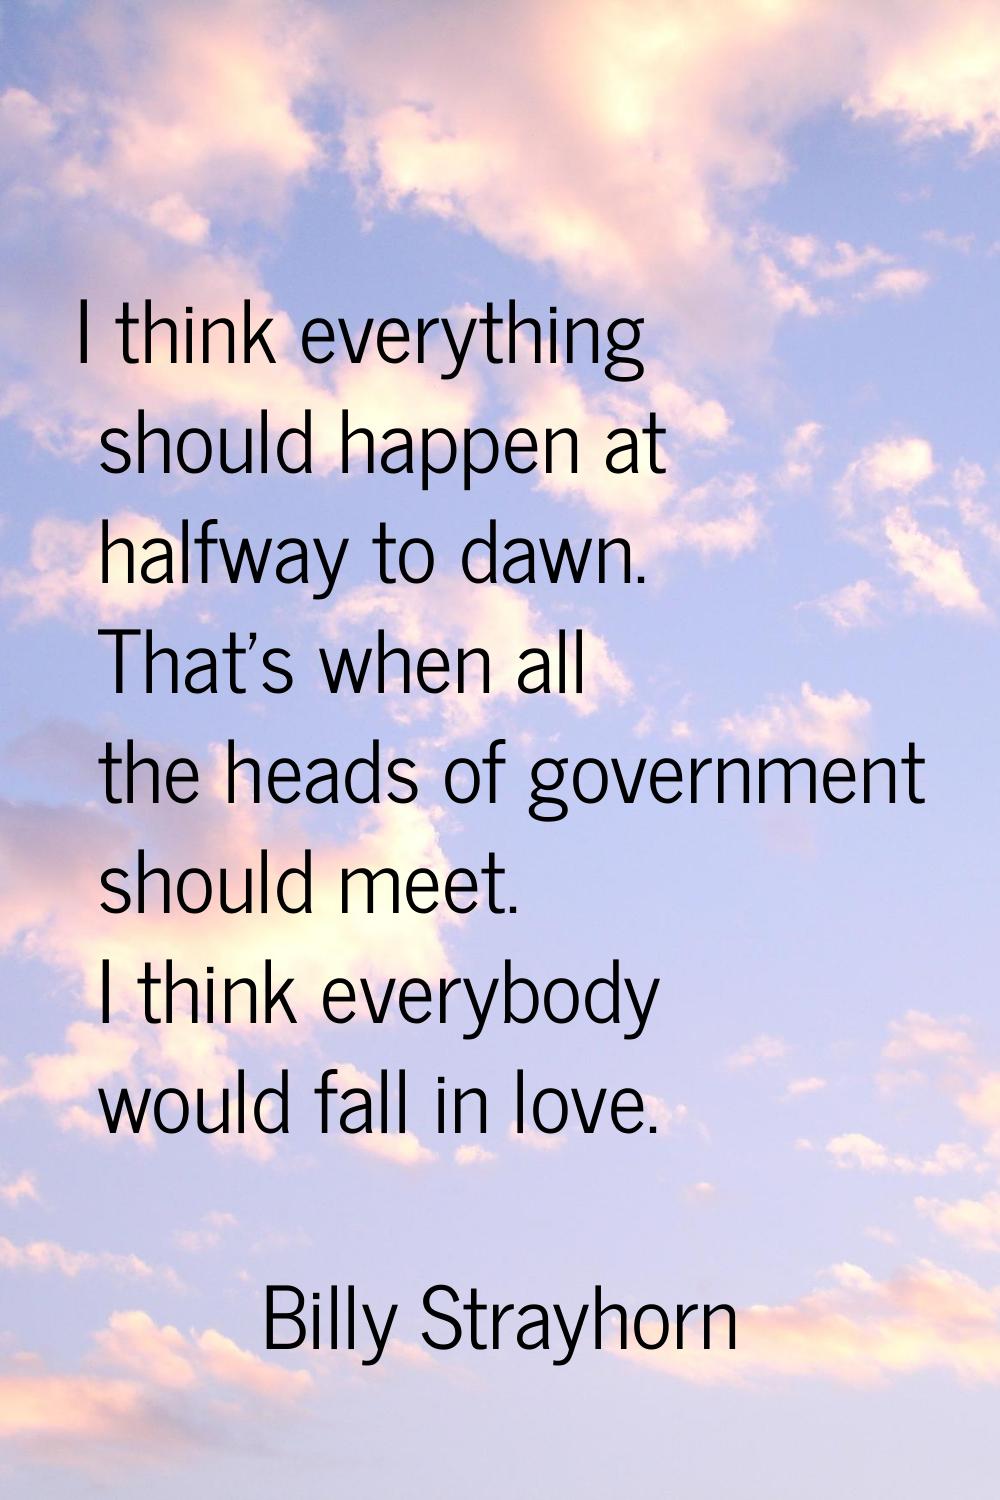 I think everything should happen at halfway to dawn. That's when all the heads of government should